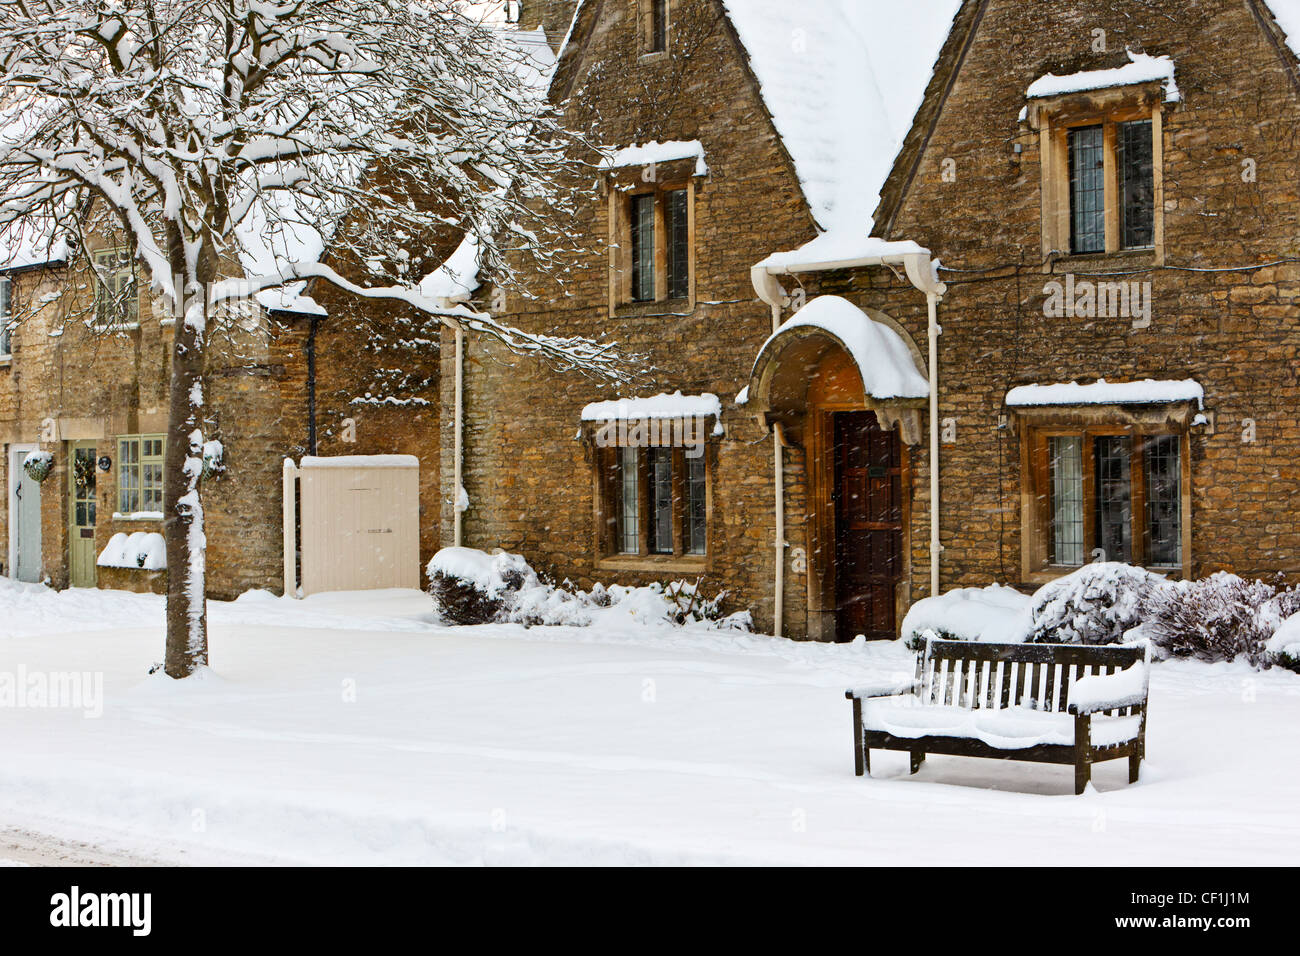 Snow falling in the Cotswold village of South Cerney. Stock Photo